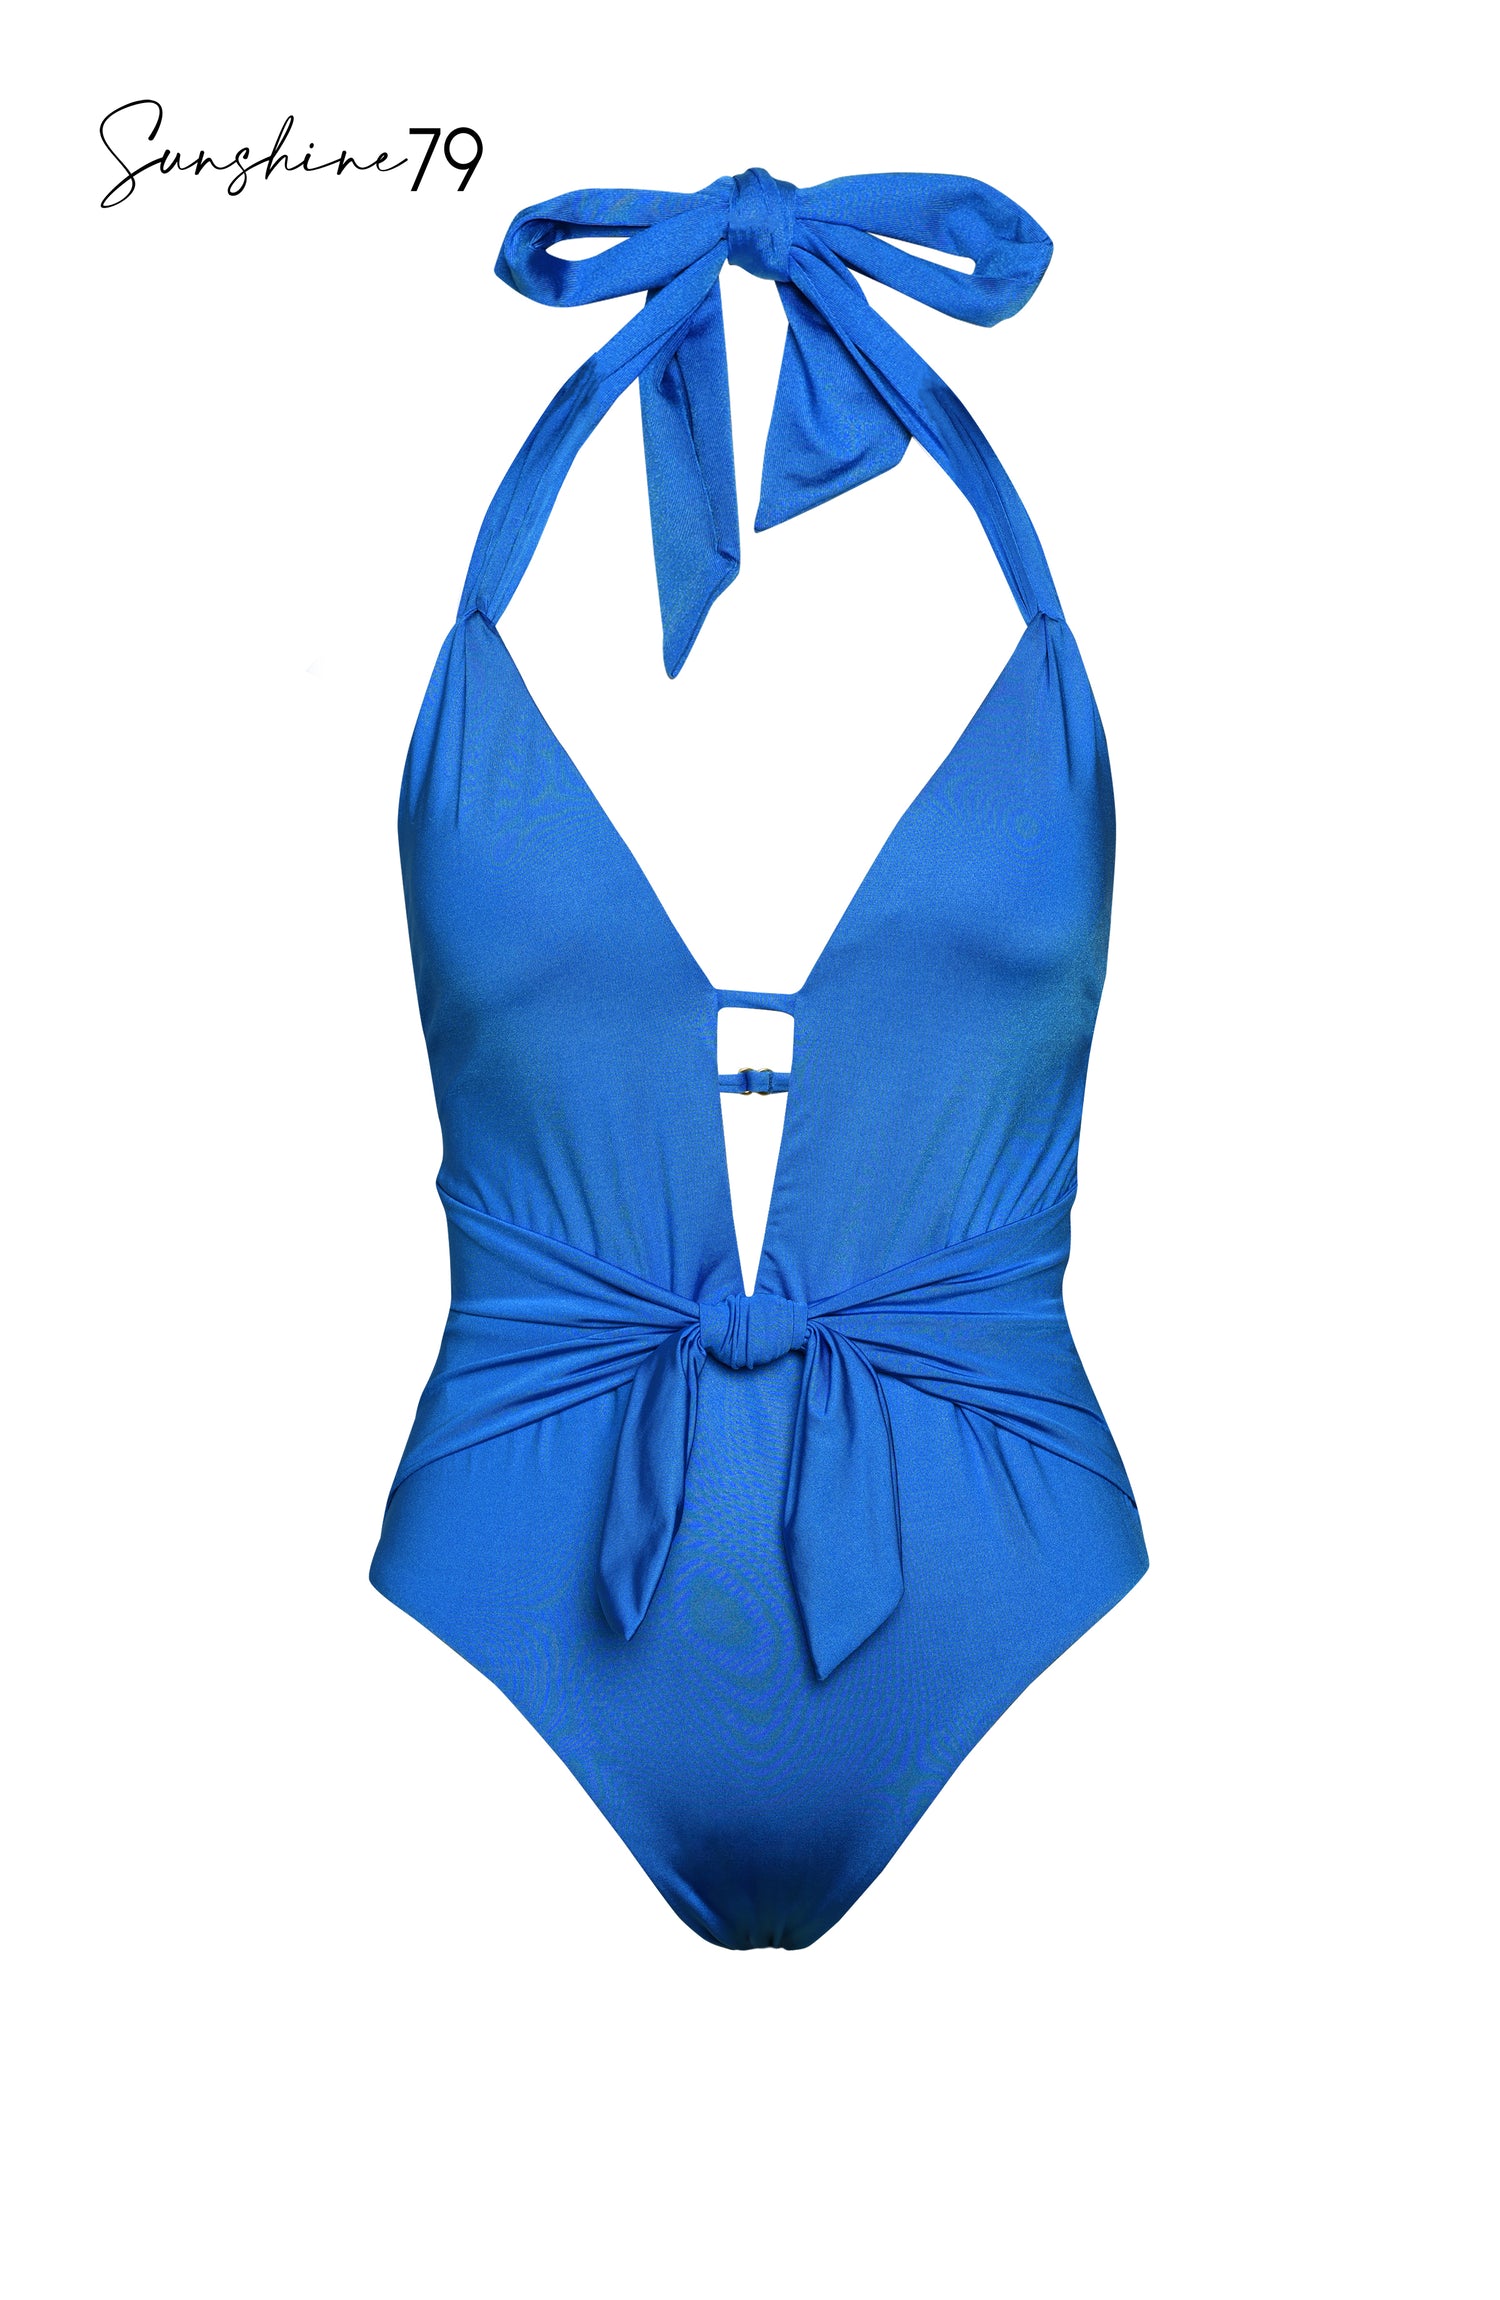 Model is wearing a solid cobalt blue colored halter plunge one piece from our Sunshine 79 brand.